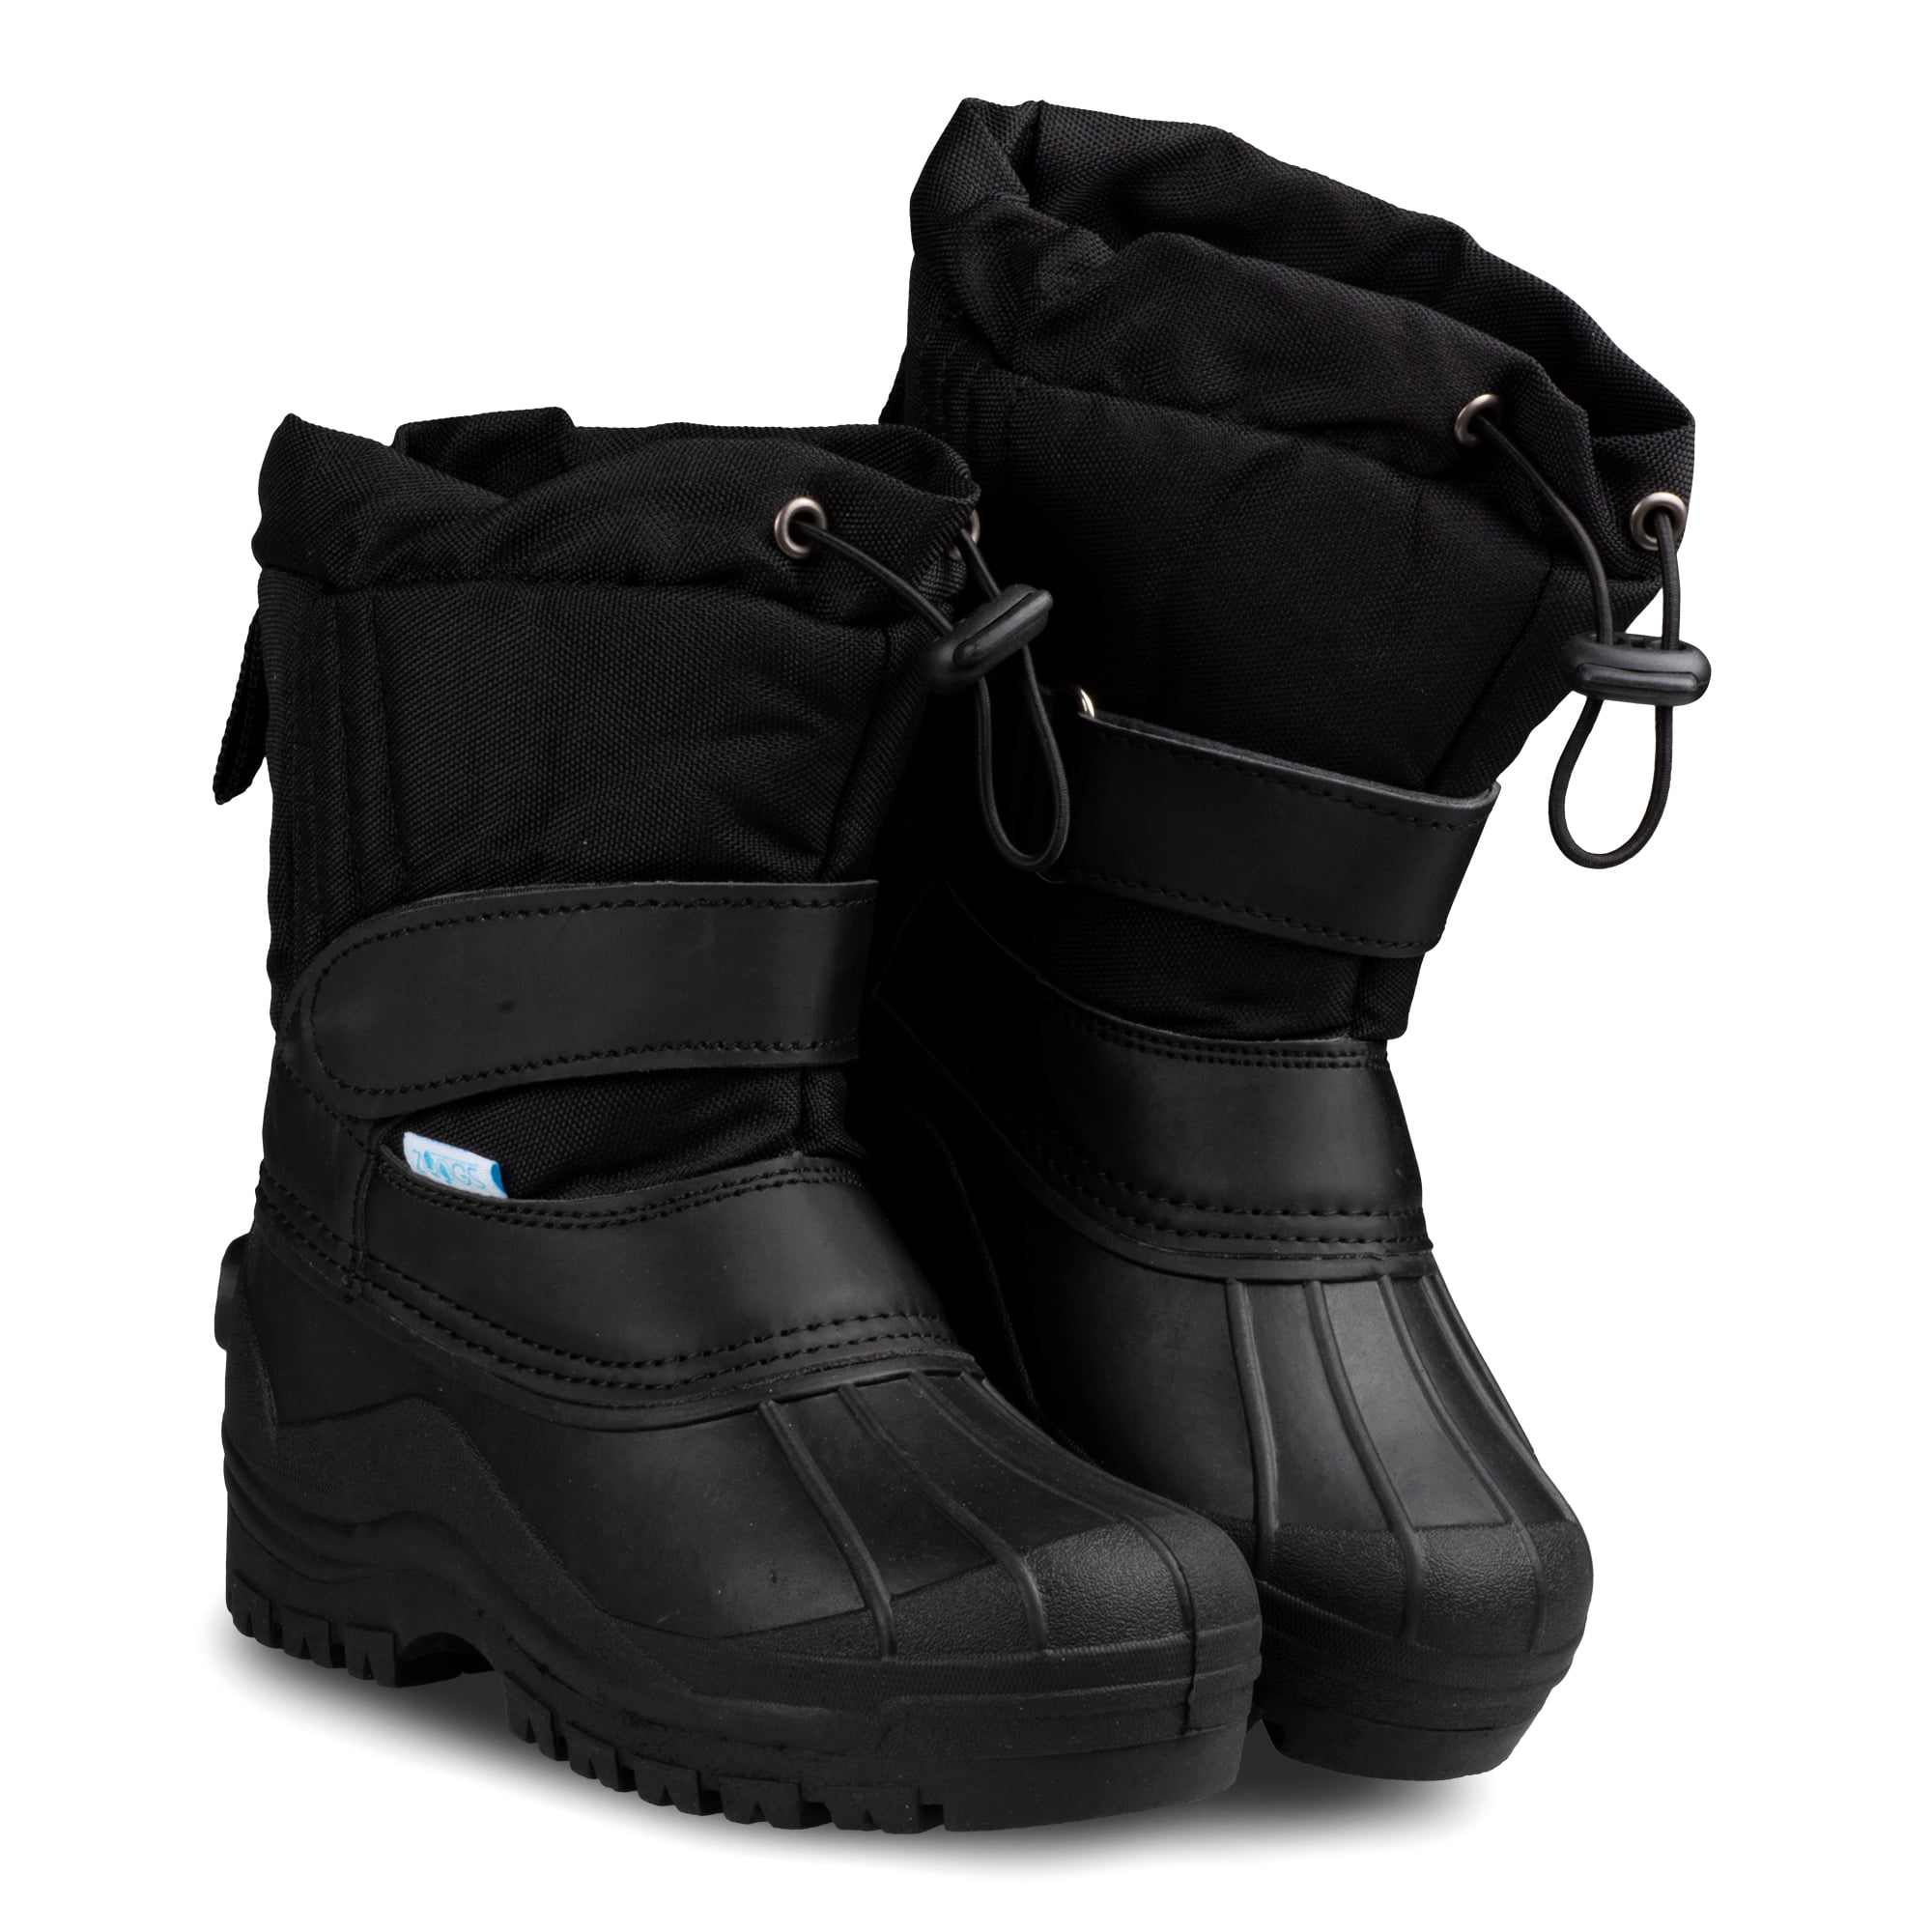 Boys ZOOGS Kids Snow Boots for Toddlers and Girls 